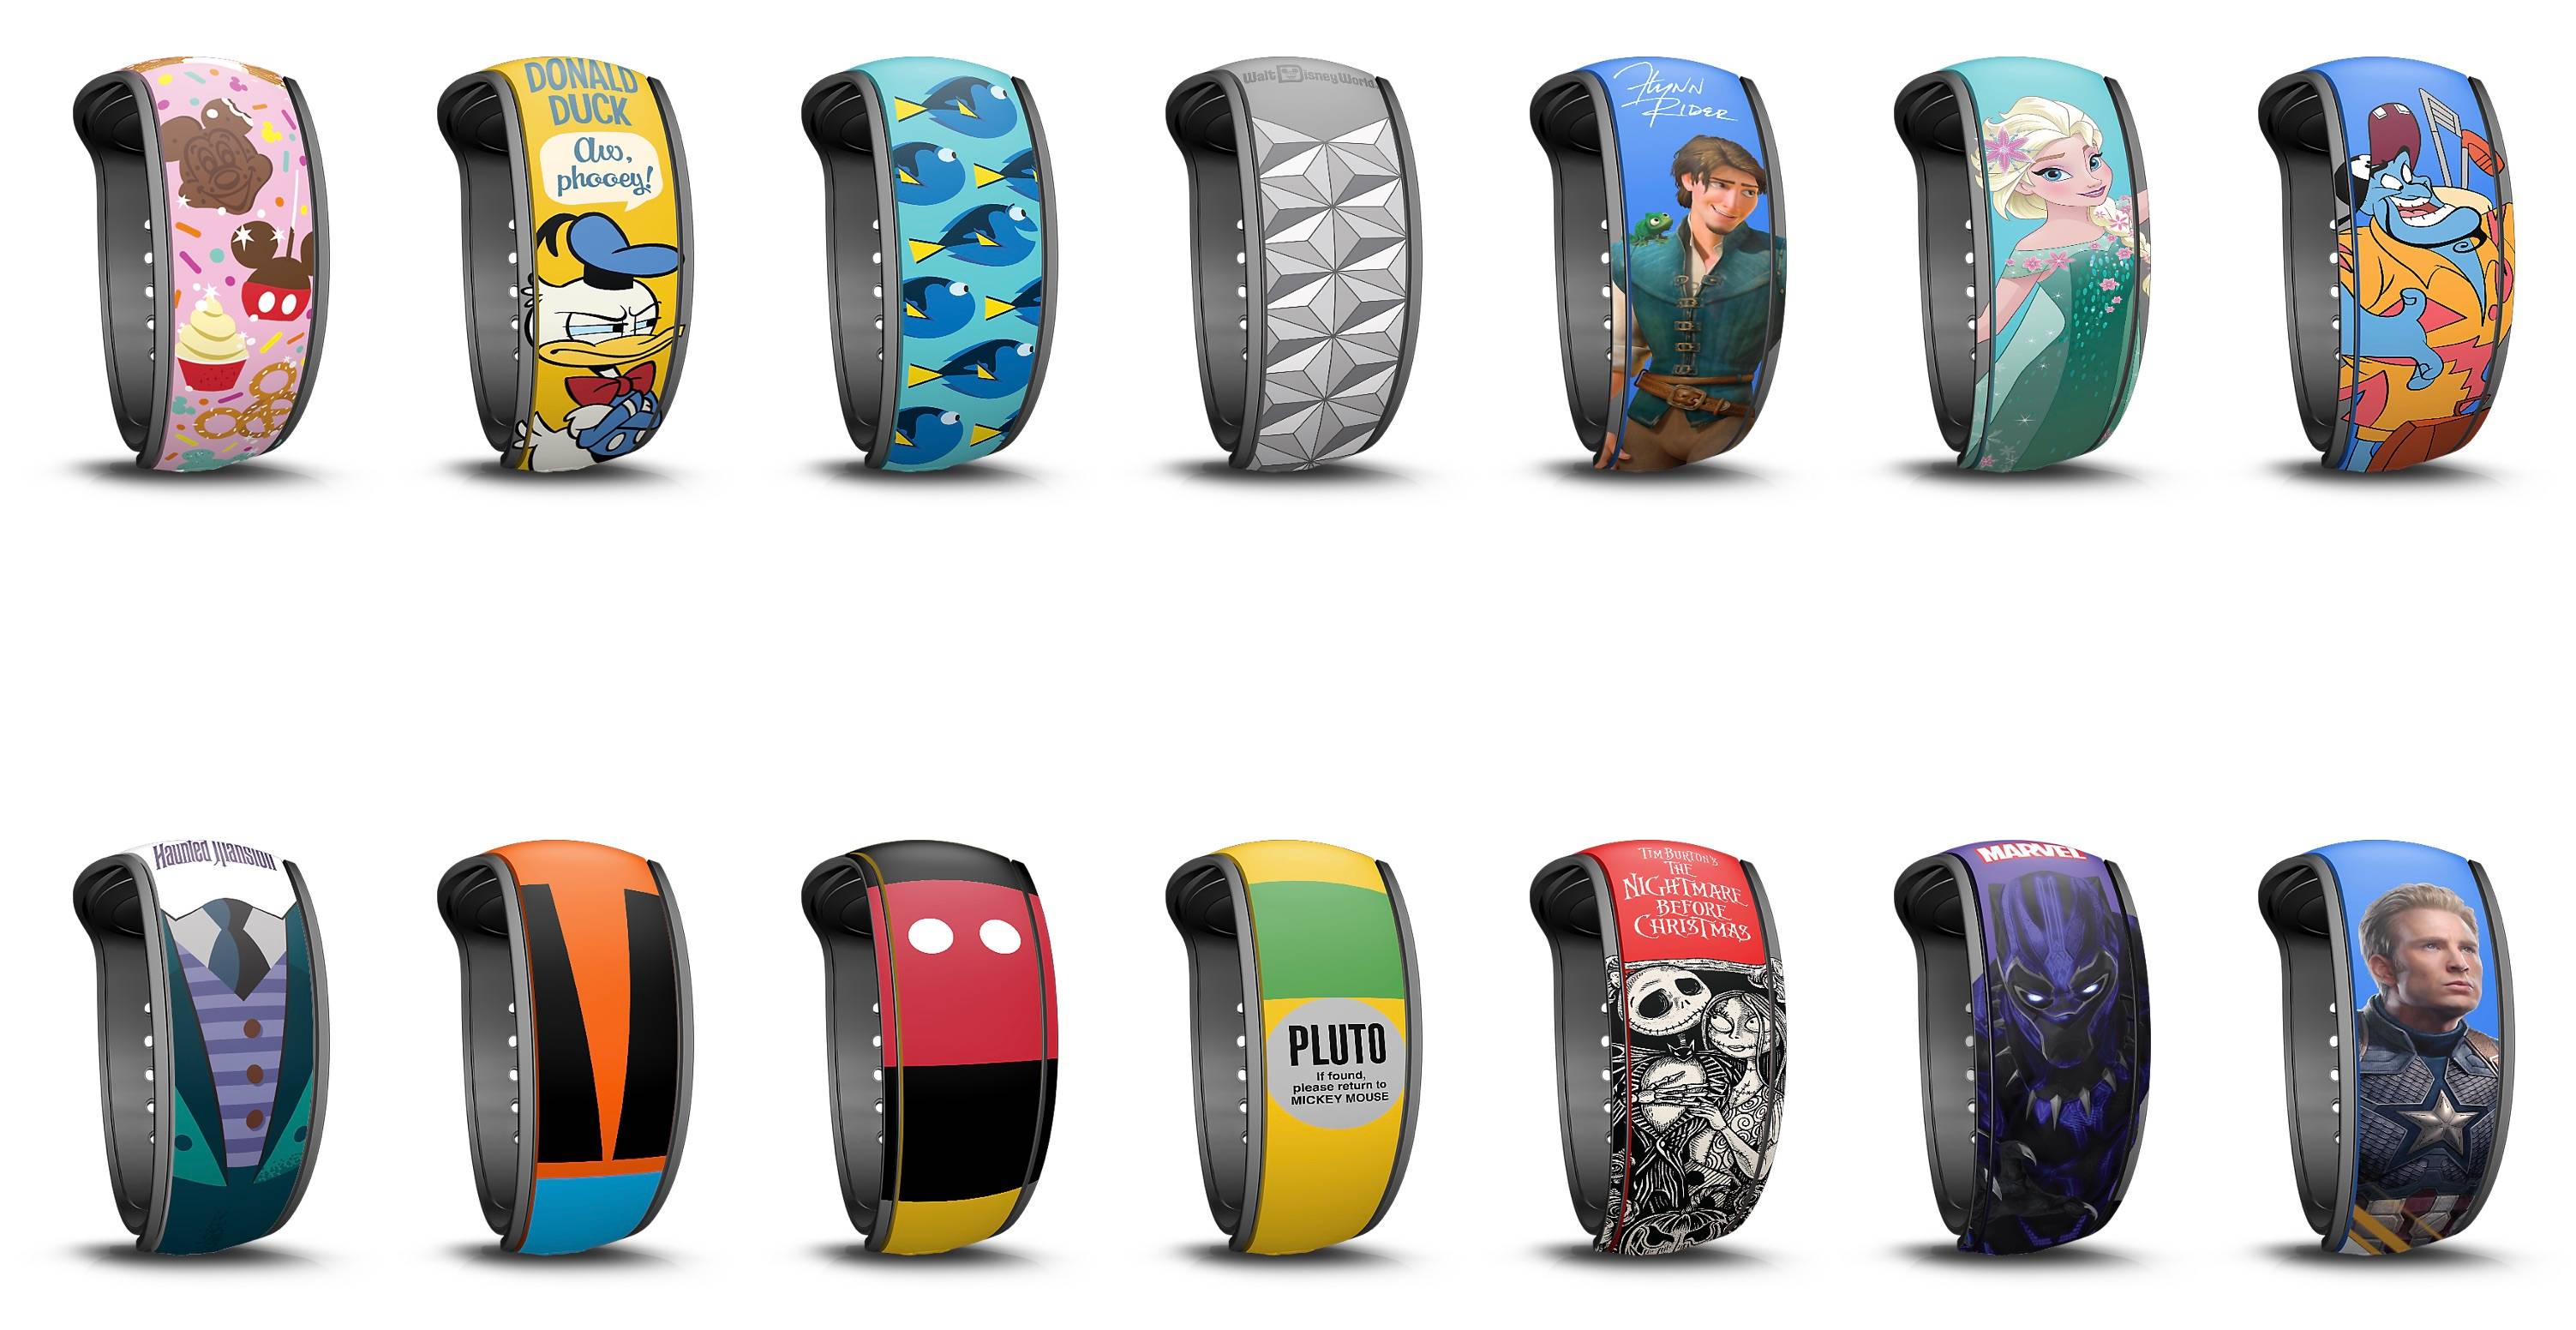 May 2019 MagicBand options for resort guests and passholders